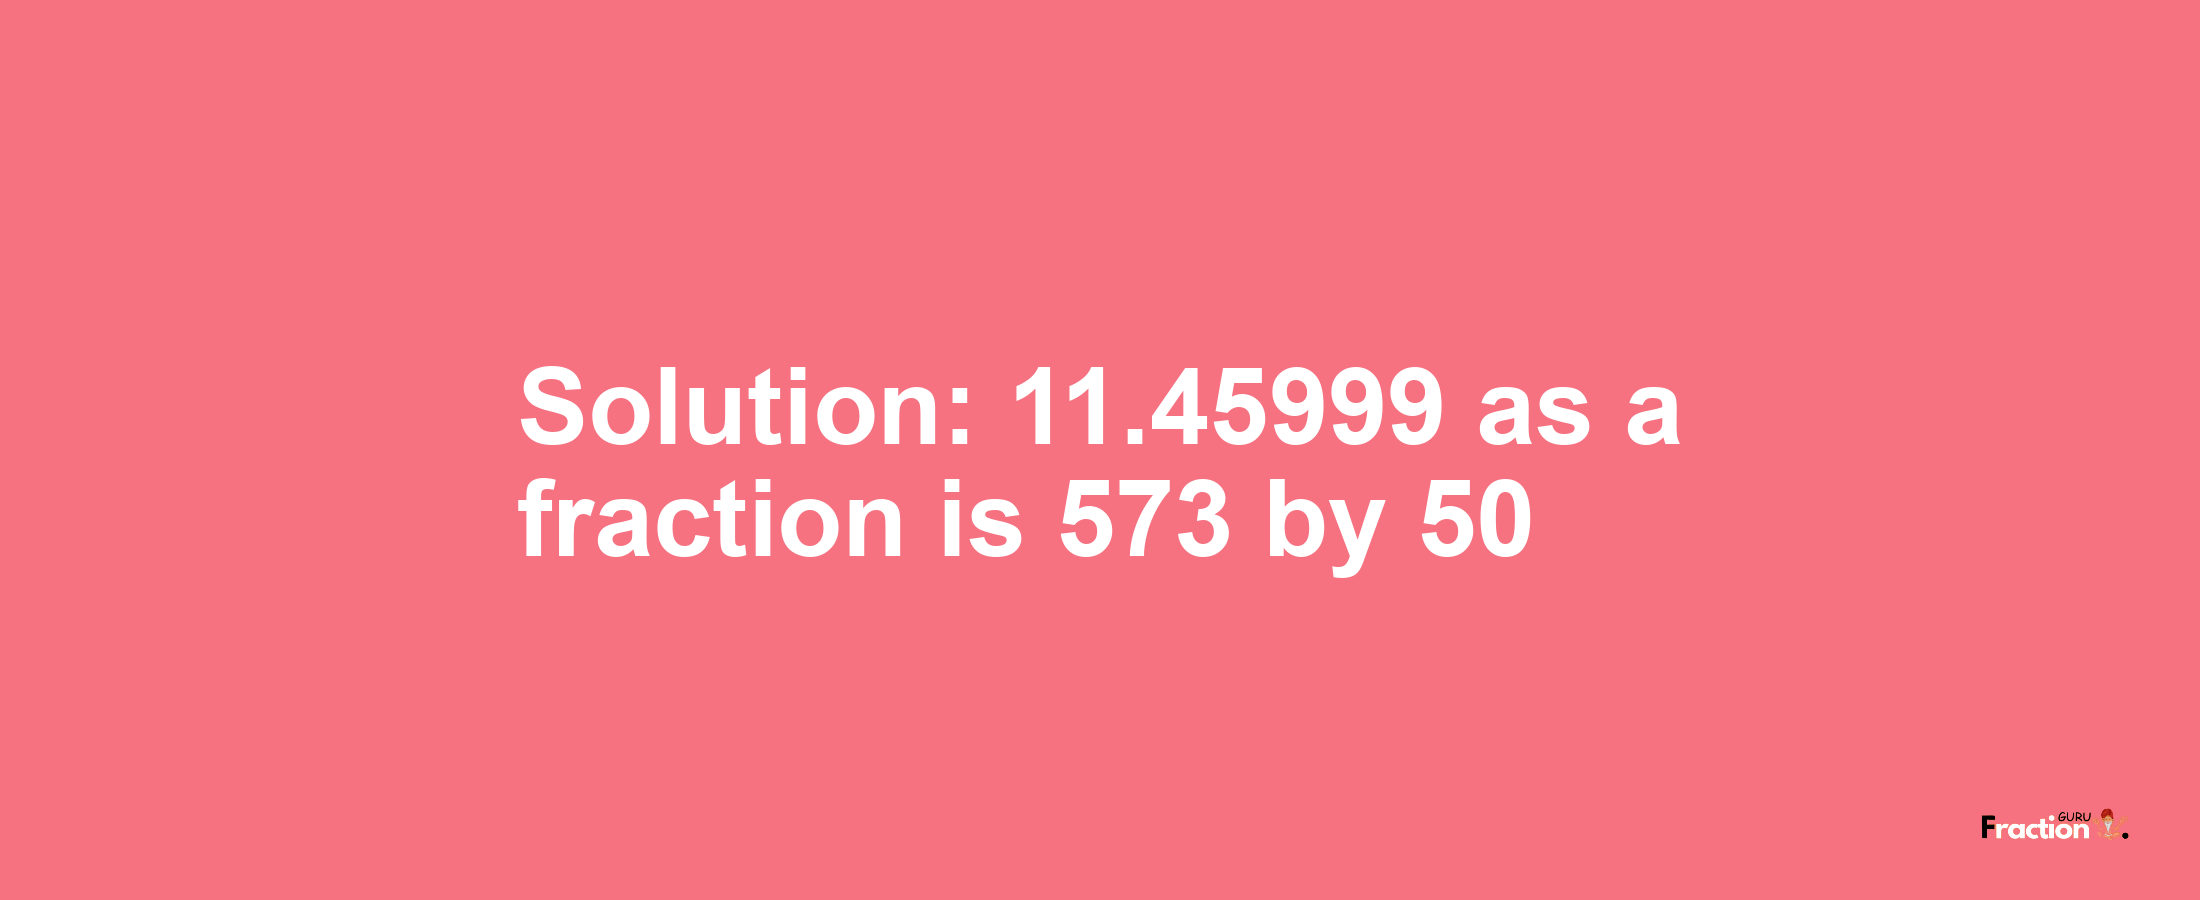 Solution:11.45999 as a fraction is 573/50